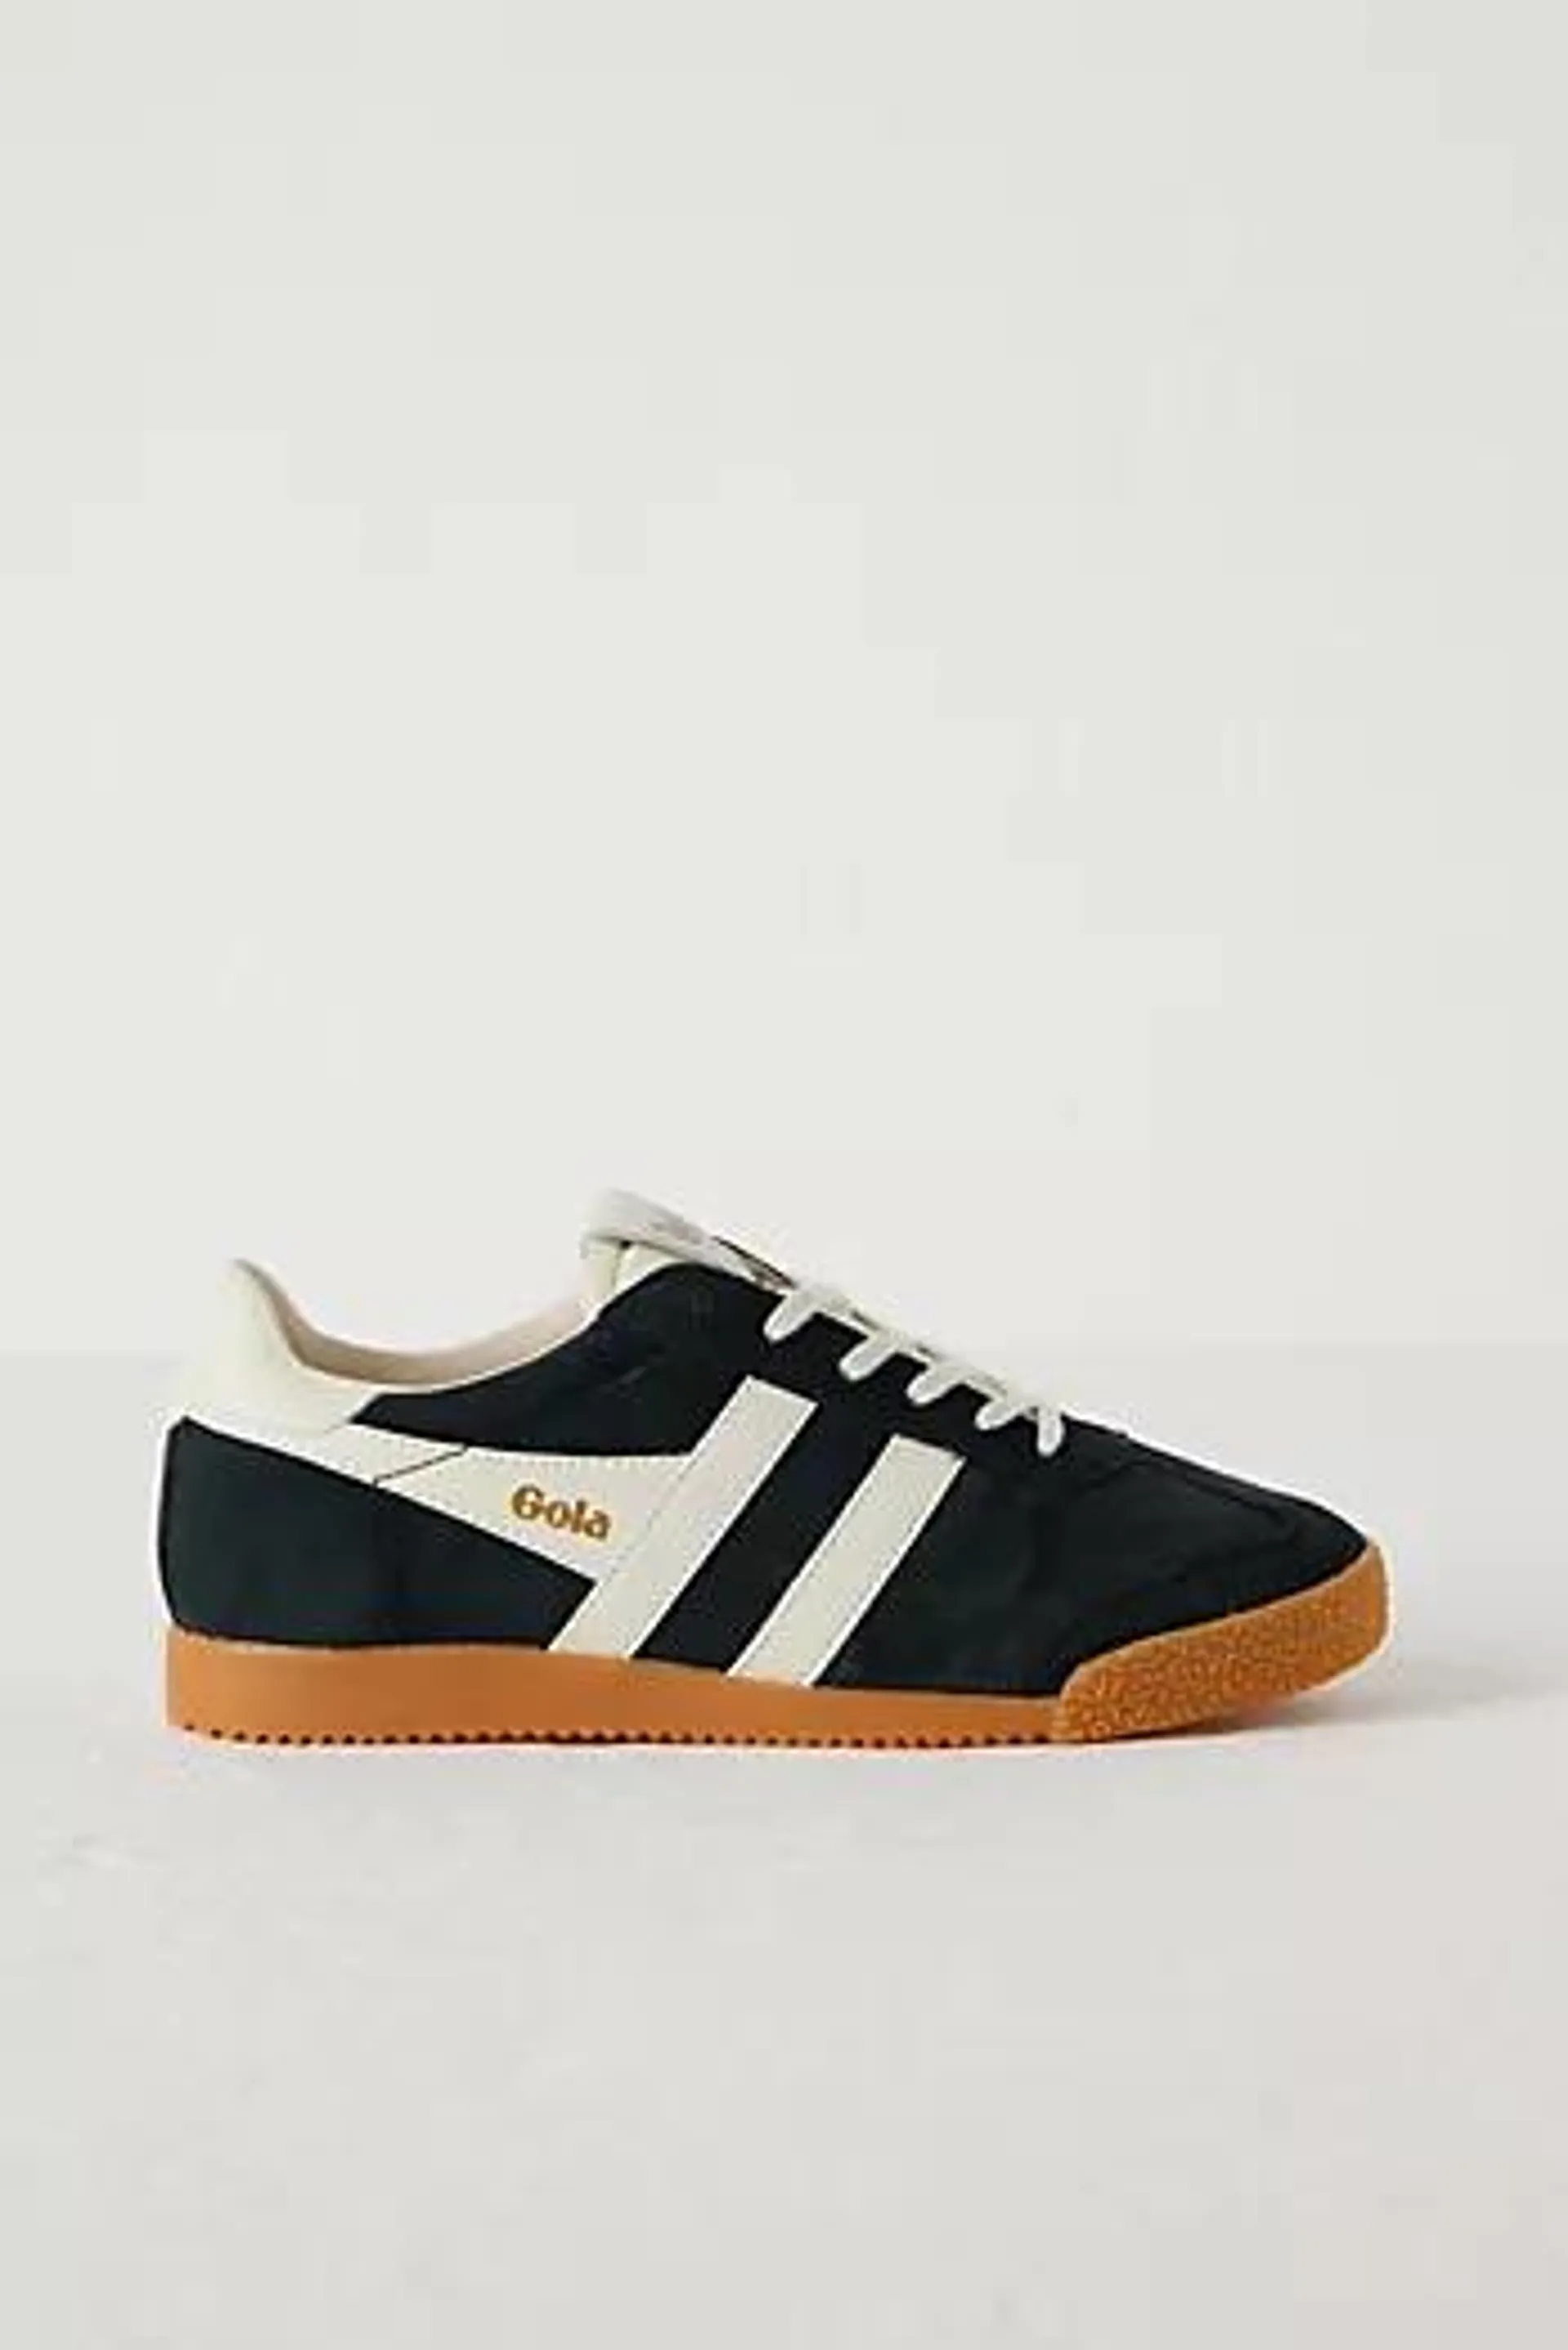 Gola for Anthropologie Elan Suede Trainers